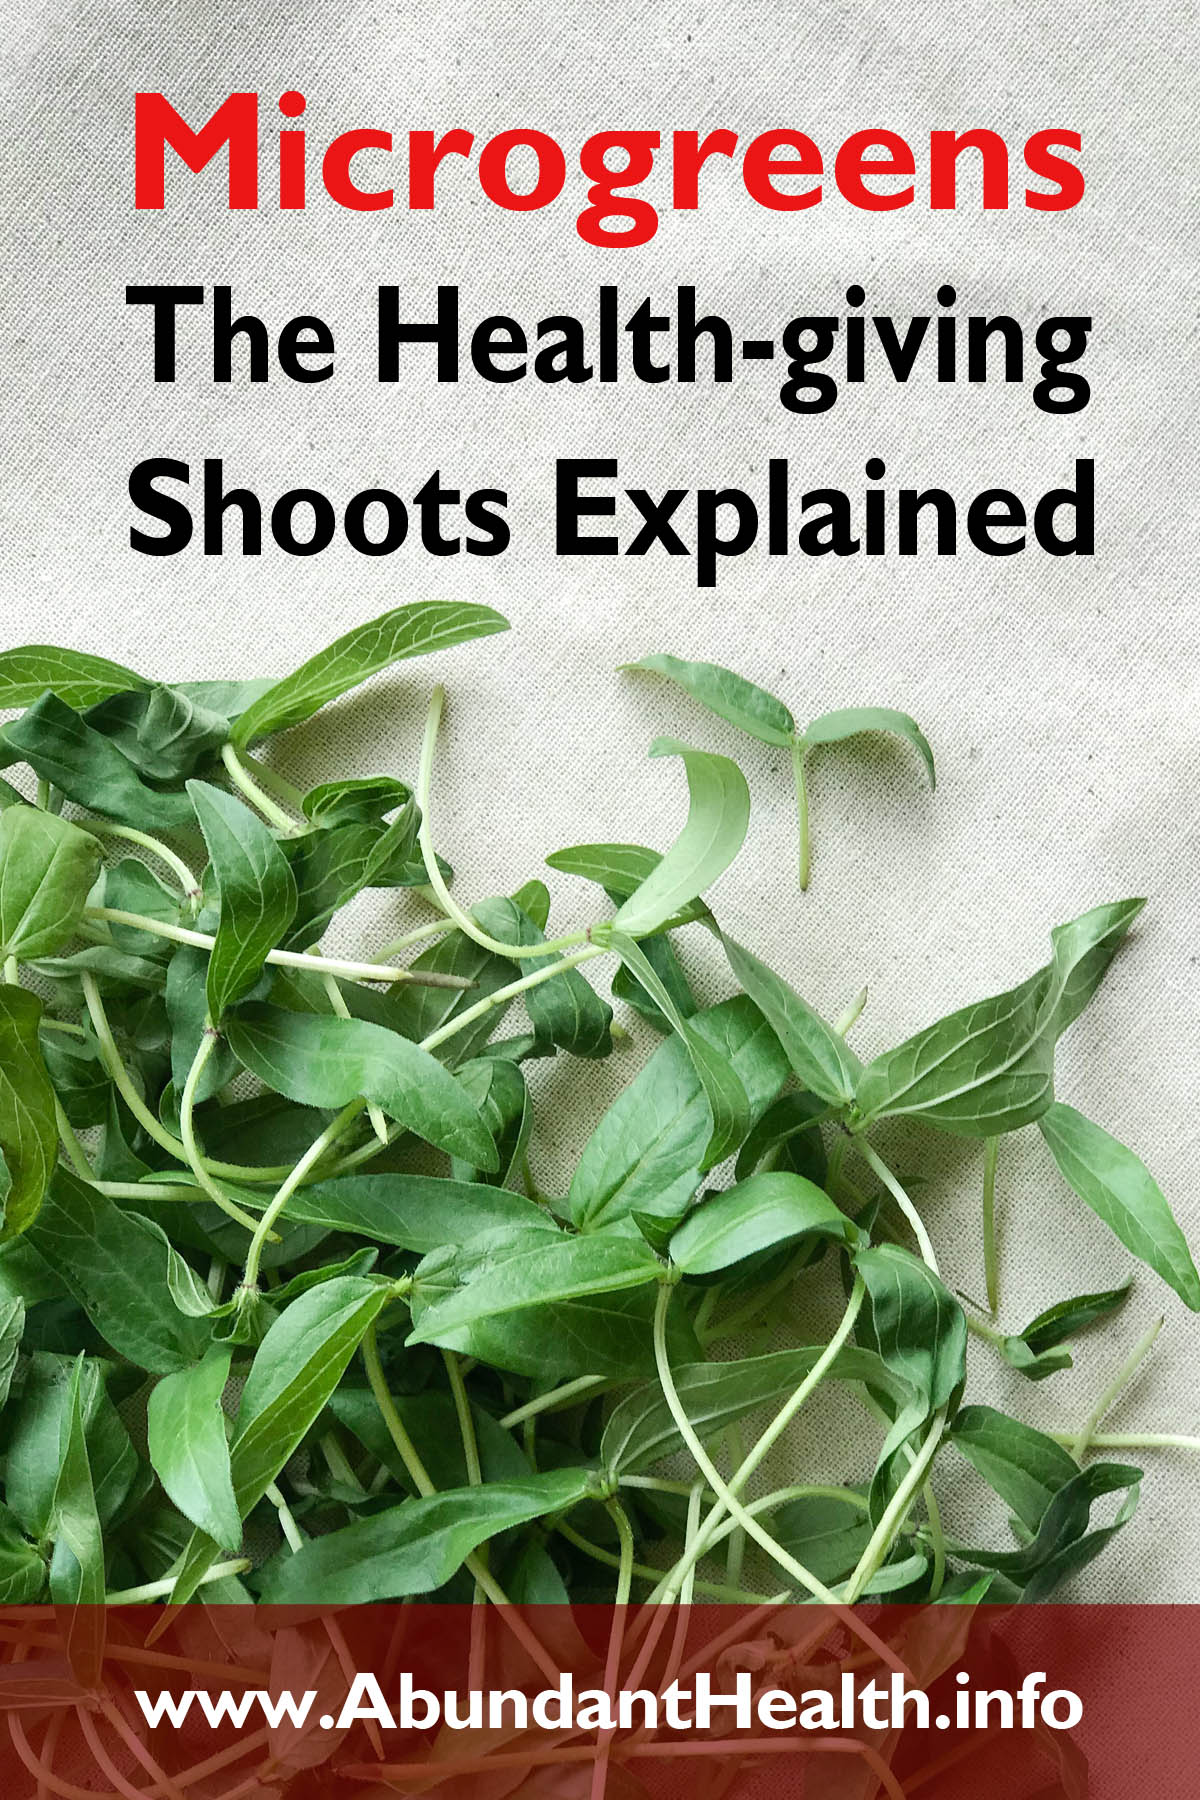 Microgreens - The Health-giving Shoots Explained